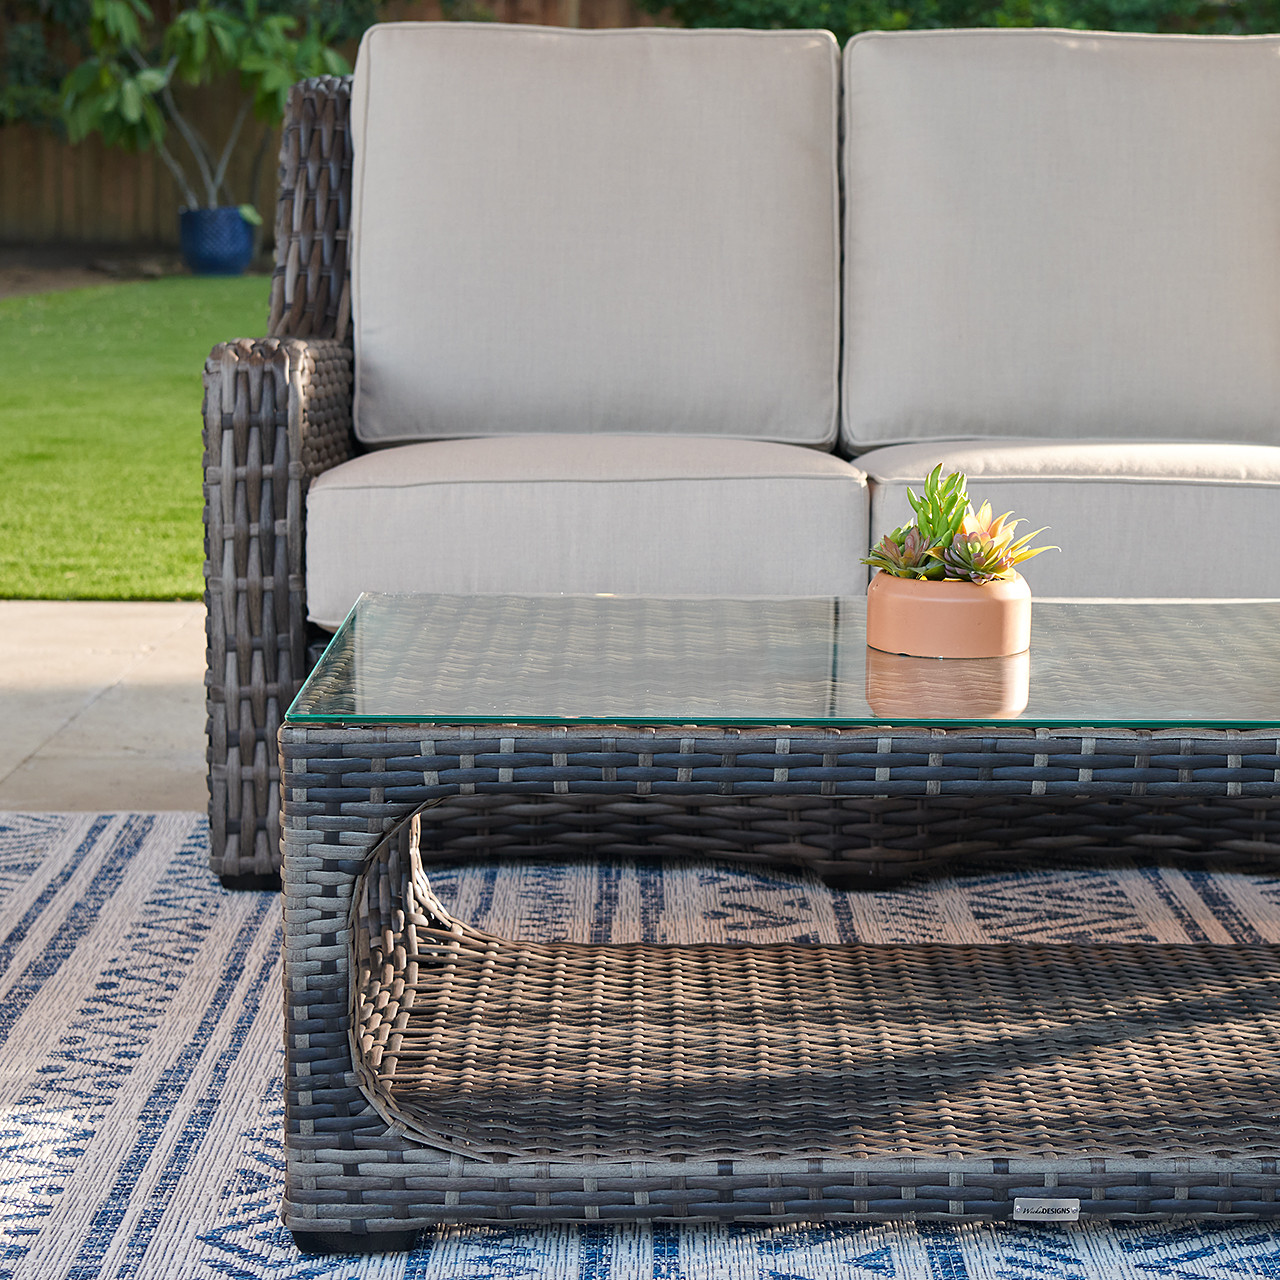 Tangiers Canola Seed Outdoor Wicker with Cushions 4 Piece Sofa Group + 46 x 26 in. Glass Top Coffee Table